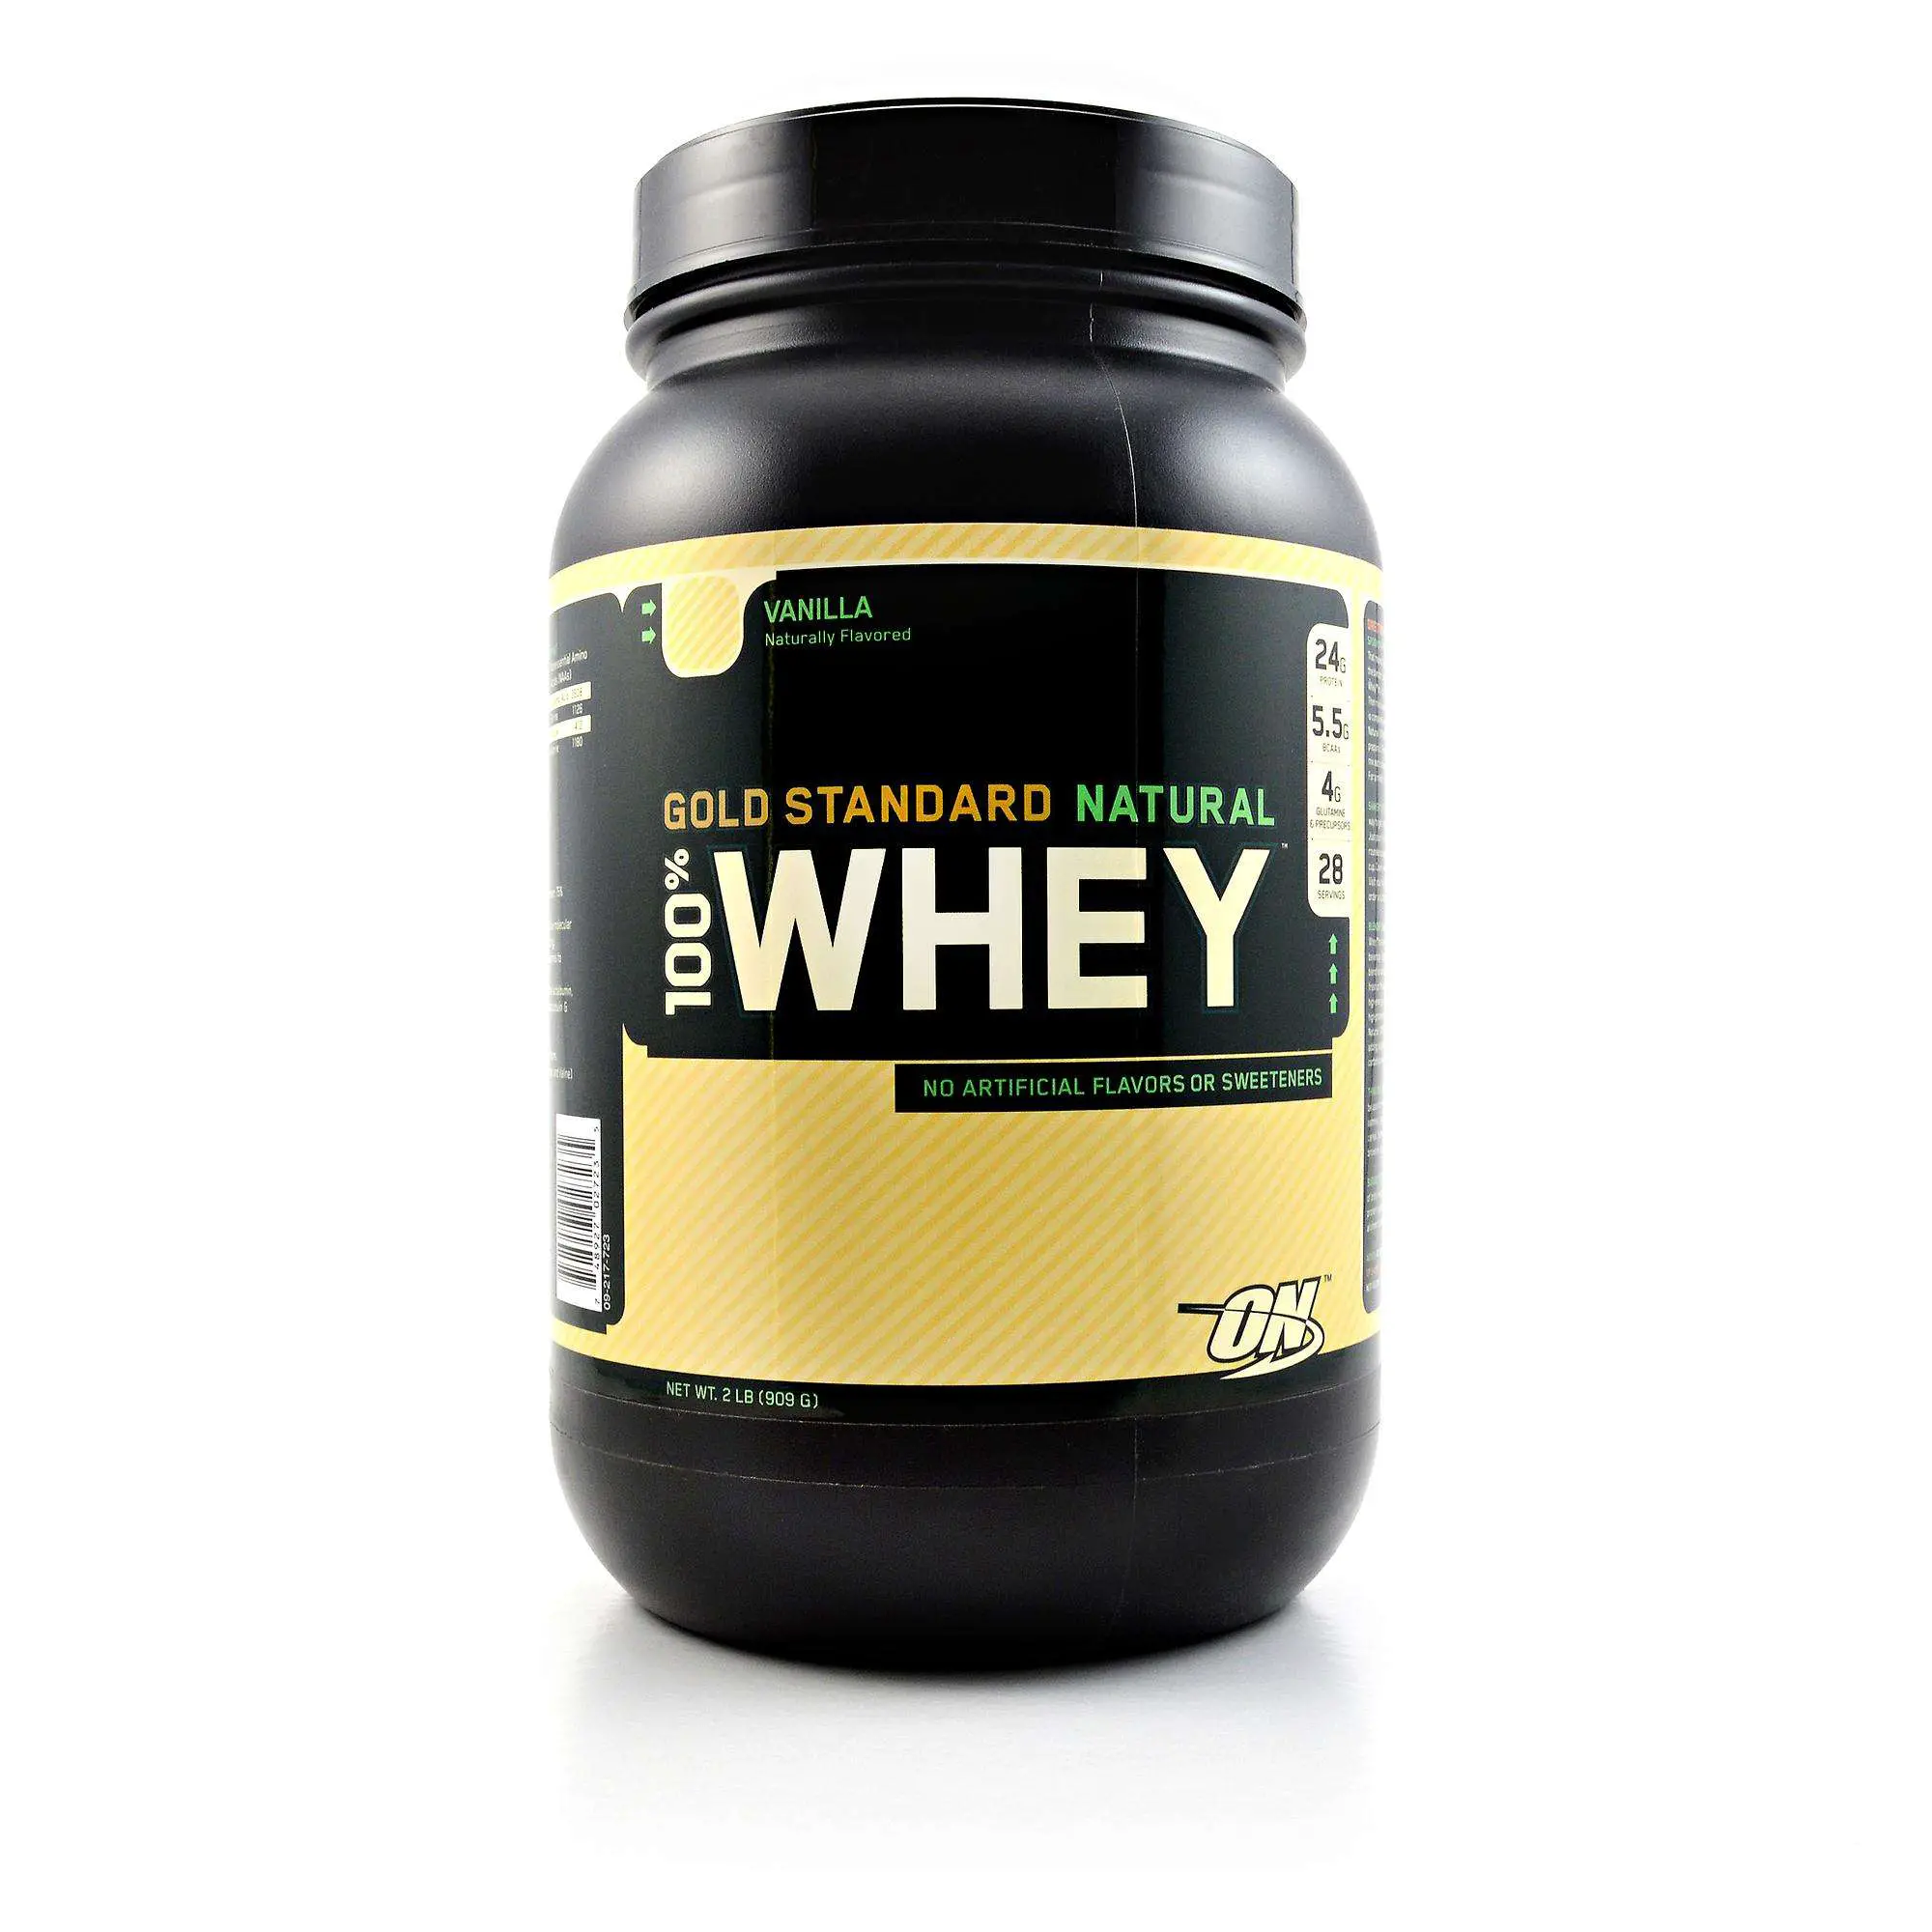 Where can I buy ON Gold Standard NATURAL whey protein here? : Philippines